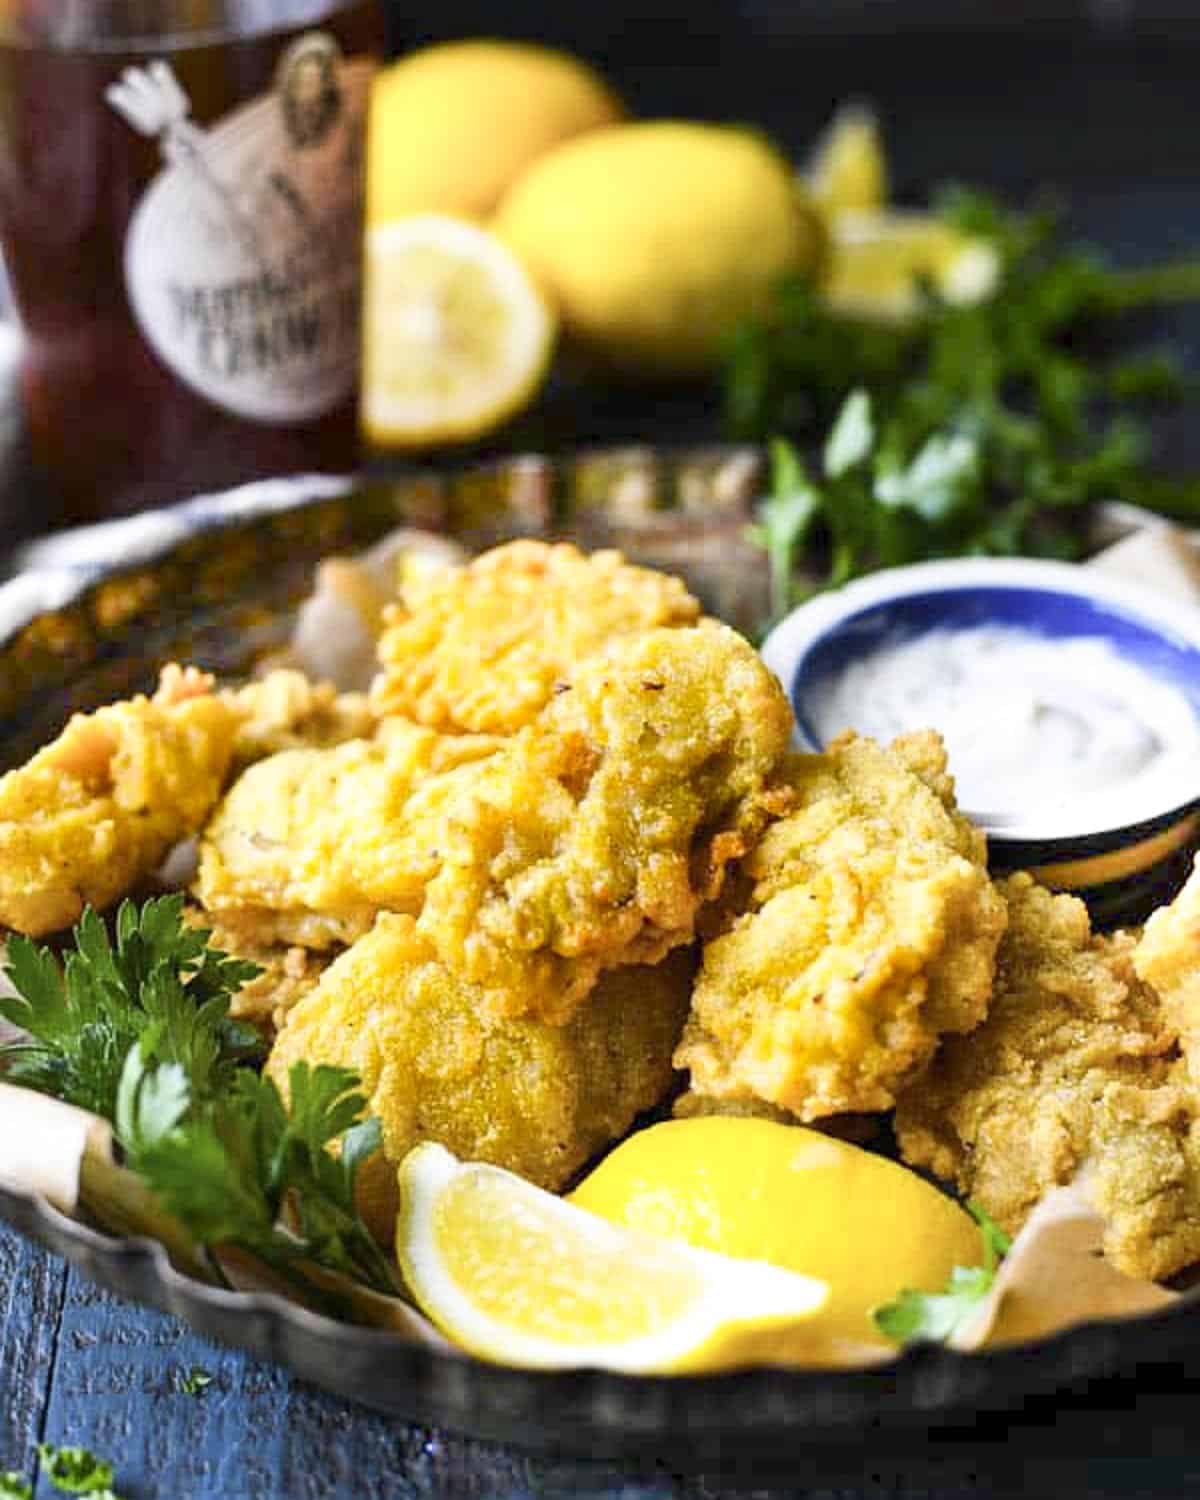 Front shot of a tray of deep fried oysters with lemons and a cold beer in the background.